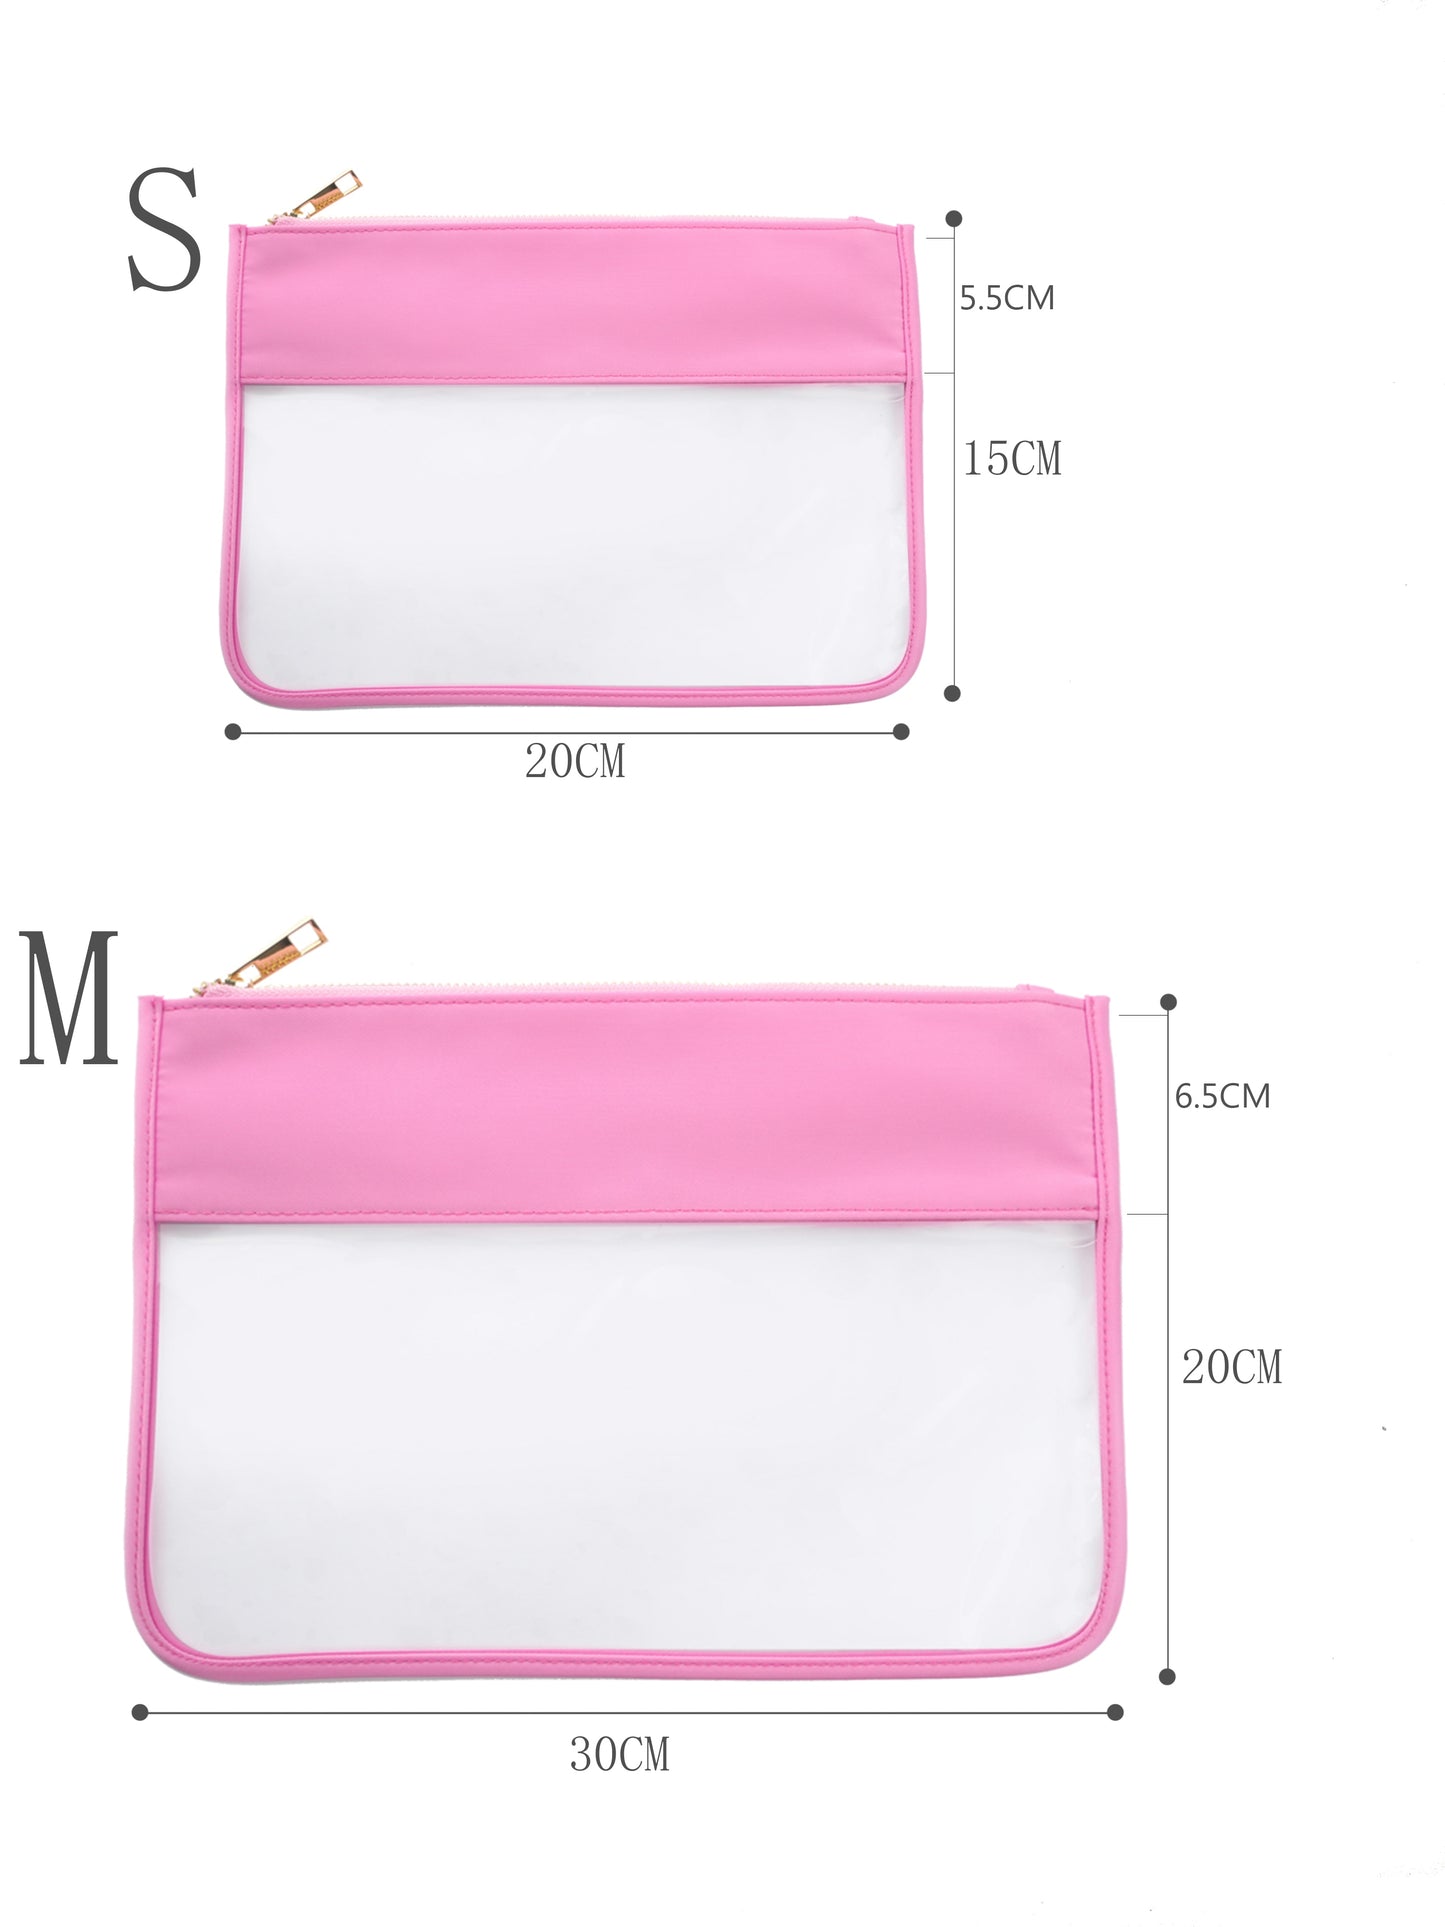 Transparent Storage Bags That can be Pasted With Personalized Letters, Convenient to Carry Snacks, Wash, Cosmetics, Mobile Phone